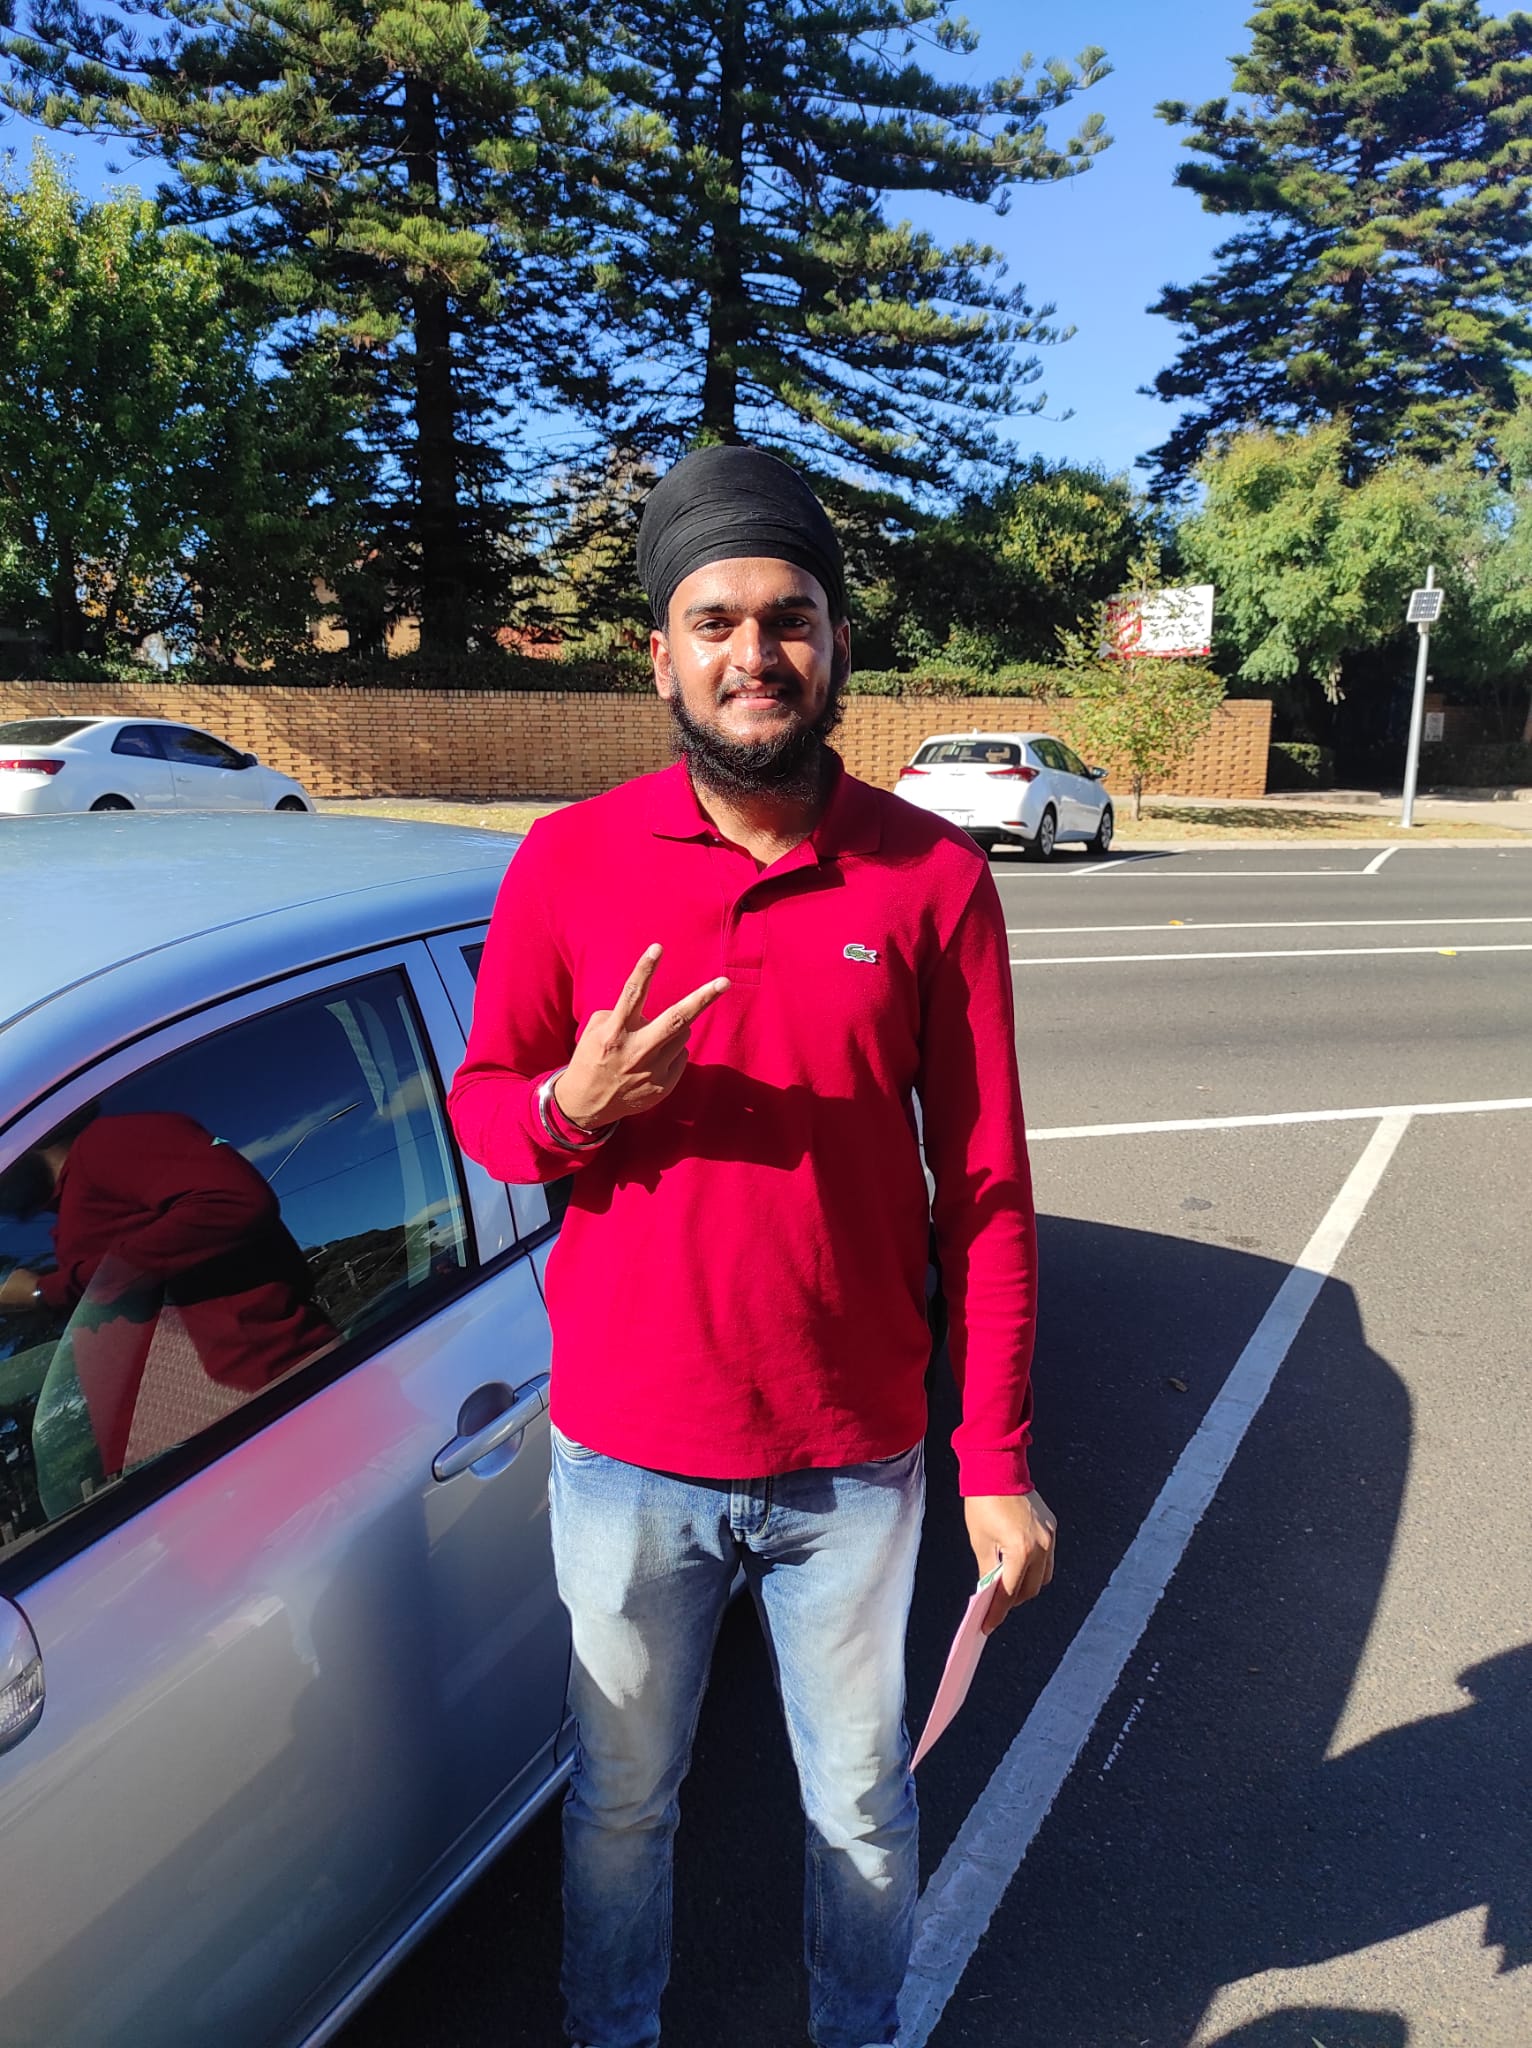 Akaal Driving School - Happy Clients